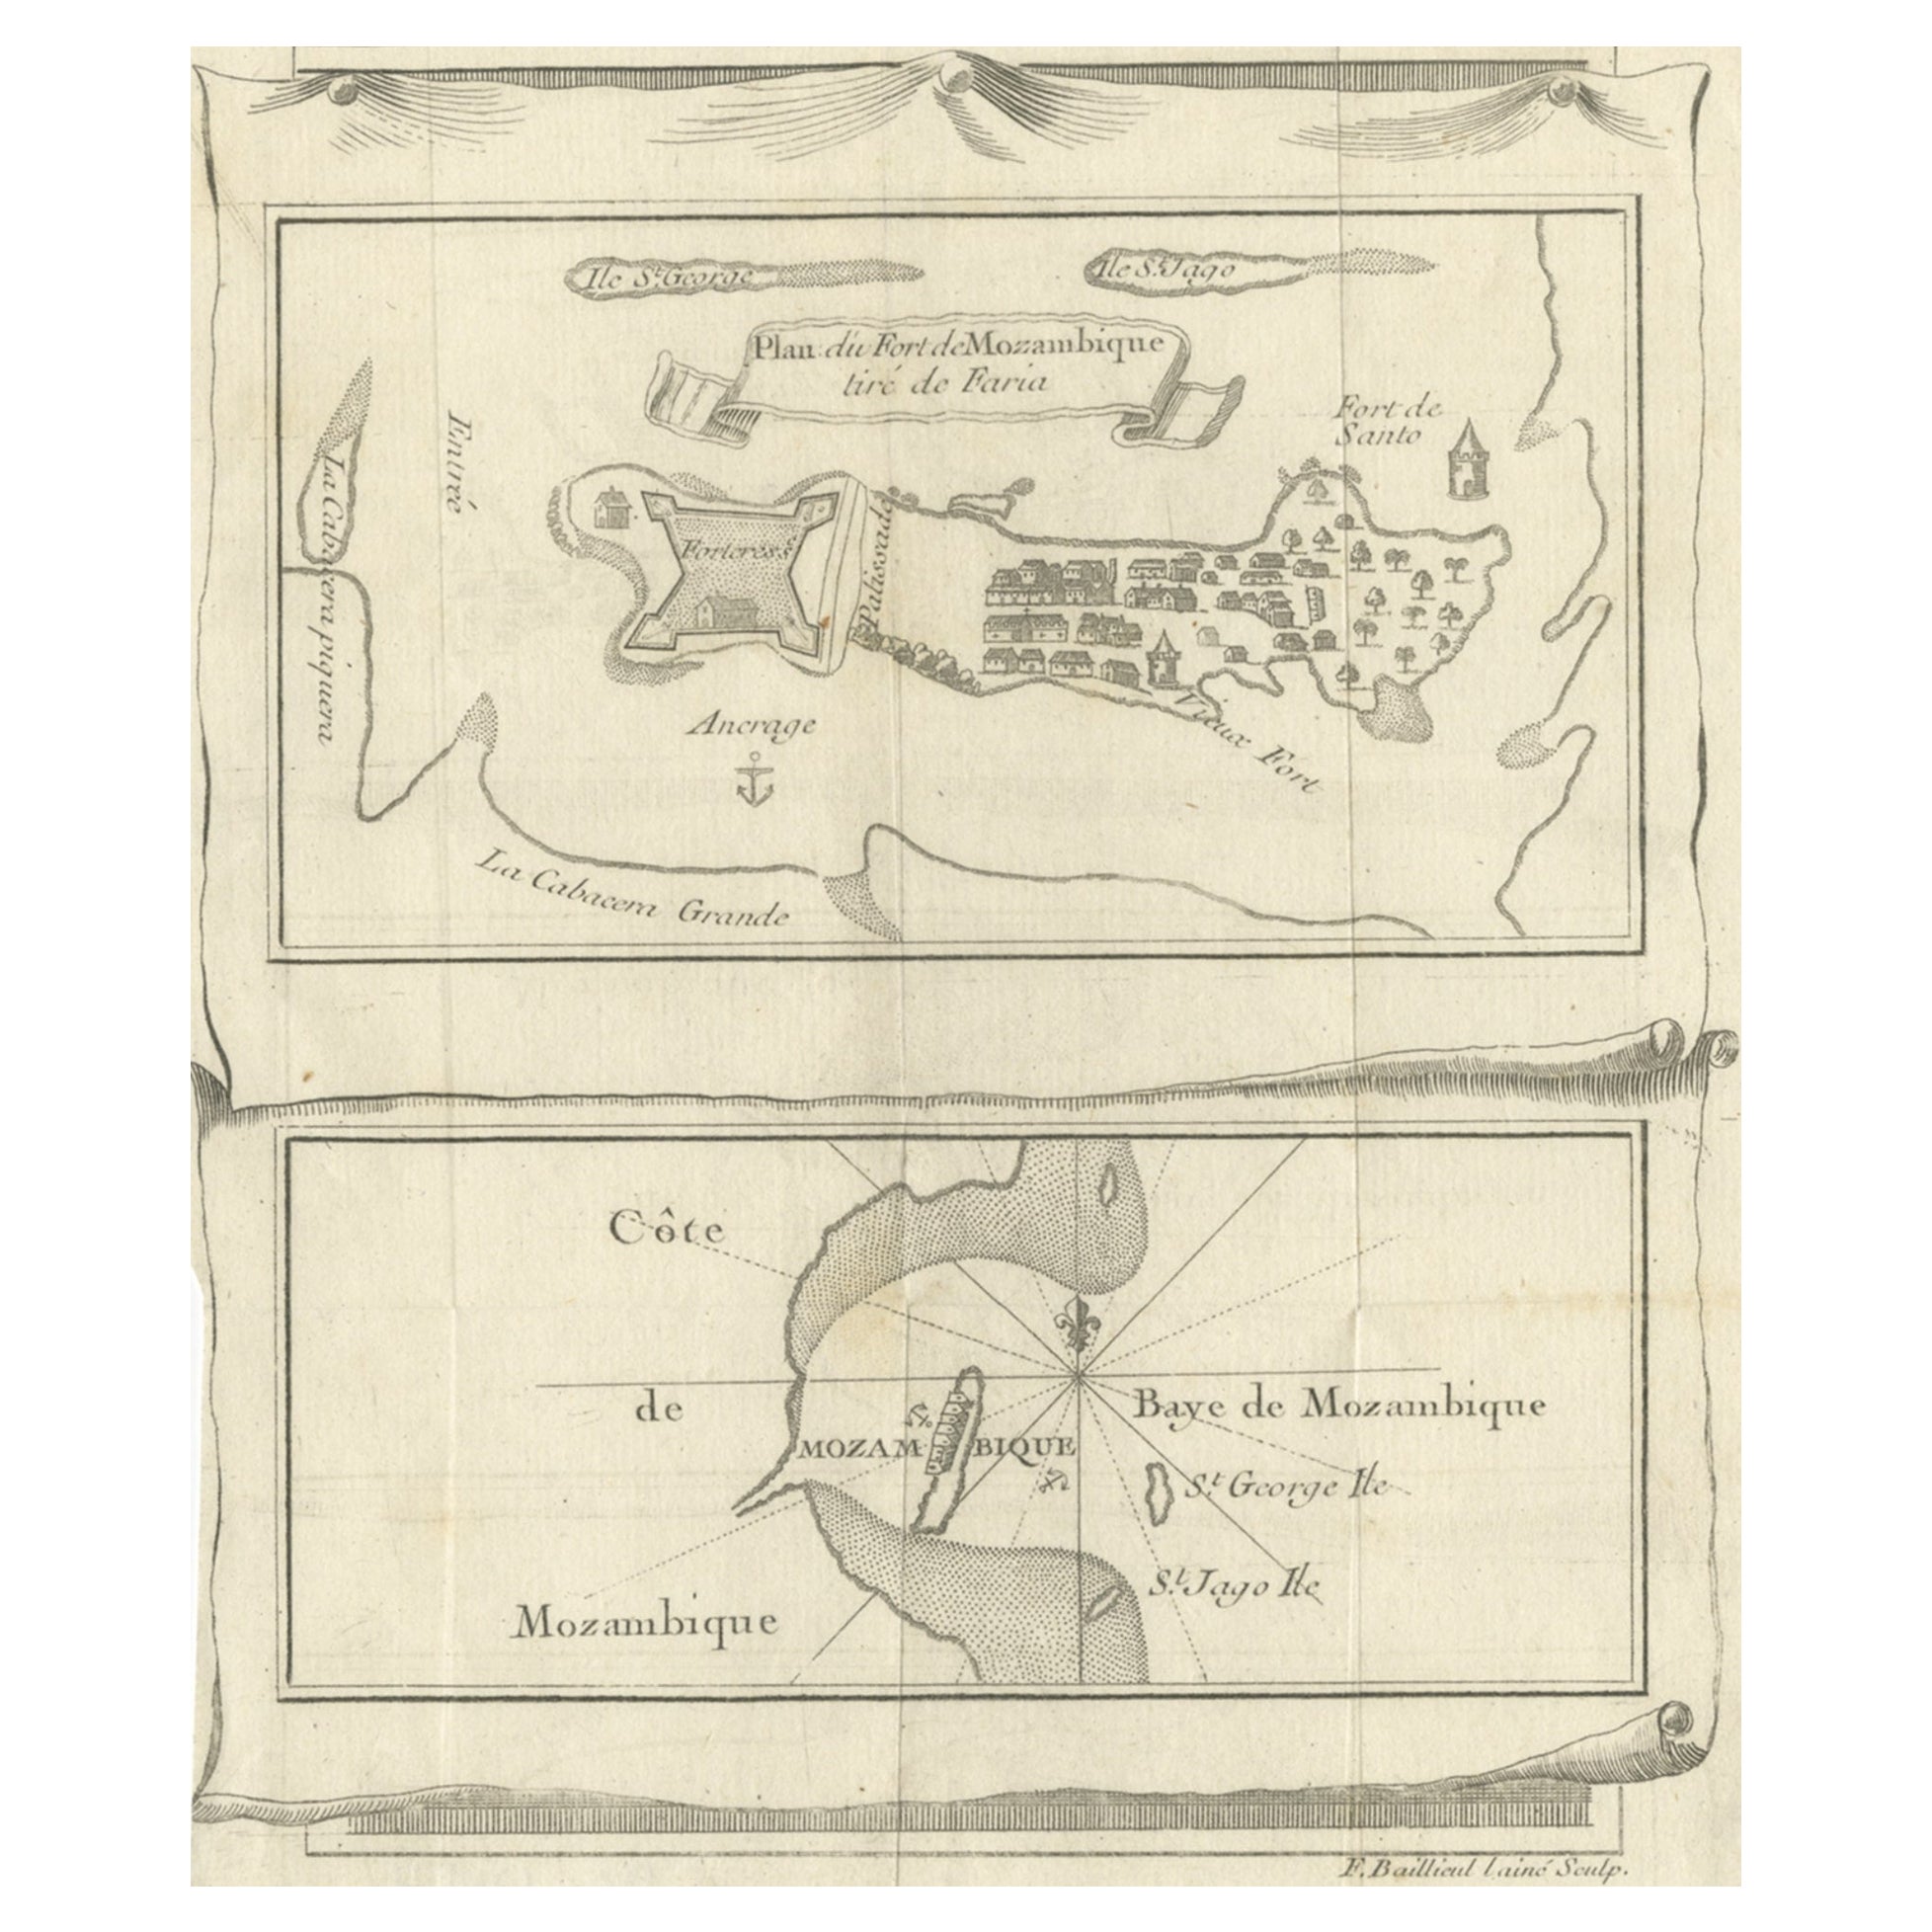 Antique Map of Fort Mozambique and Mozambique Bay in Africa, c.1759